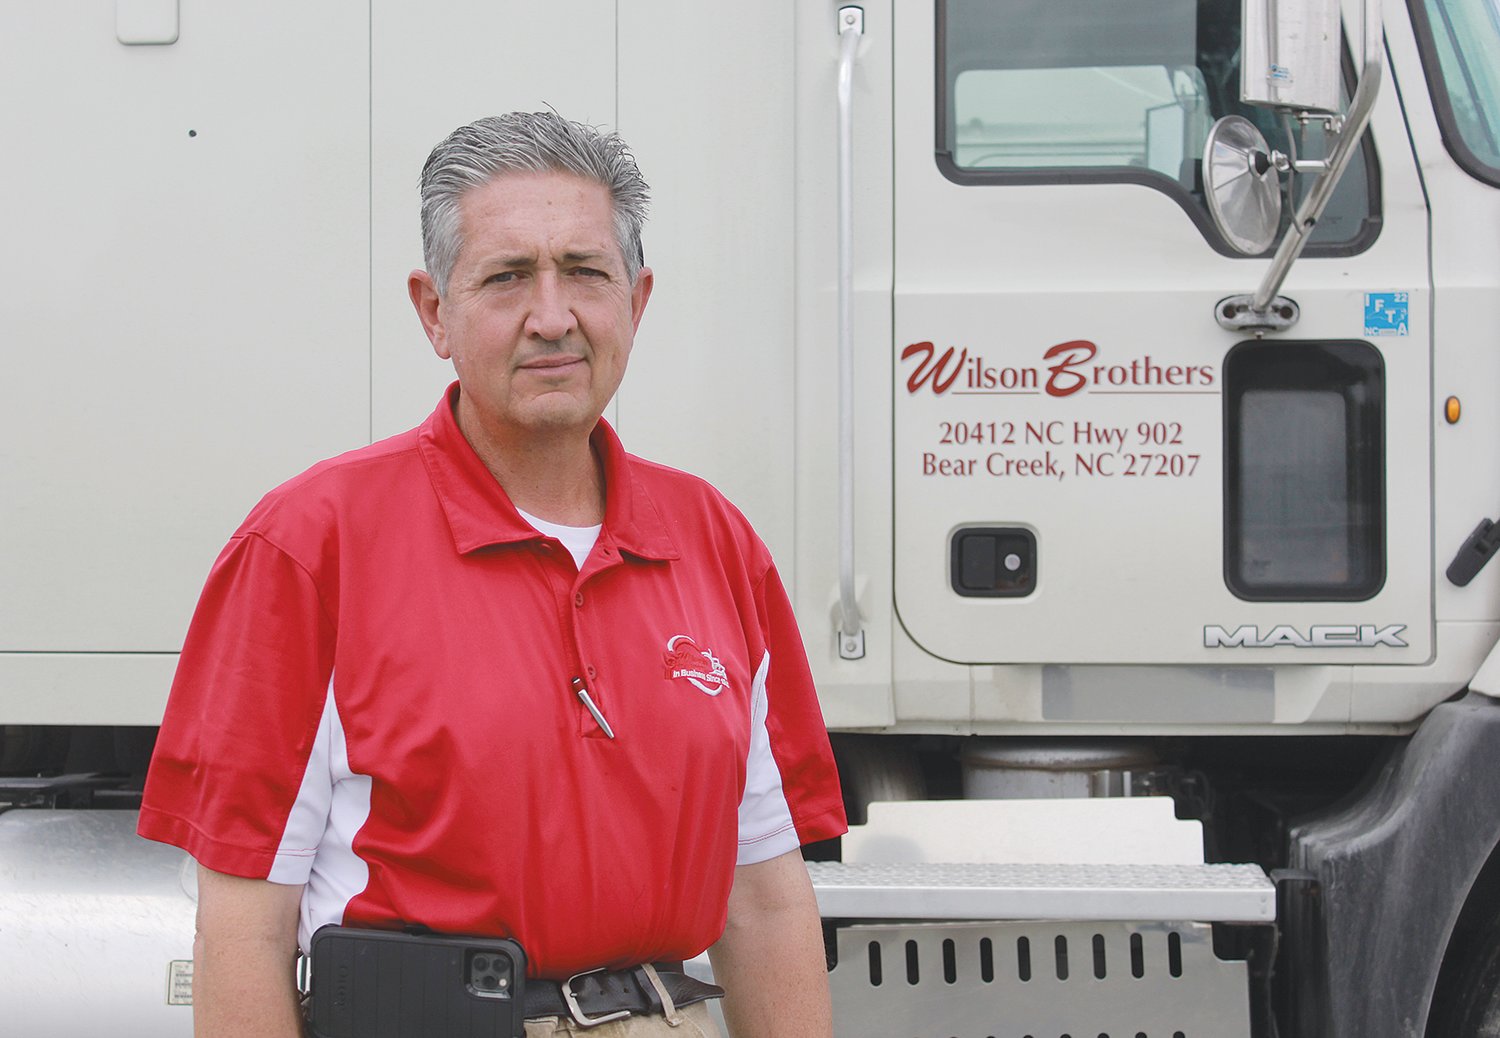 Jeff Wilson, president of Wilson Brothers Milling and Trucking Co., stands next to one of his company's trucks on Friday. Wilson Brothers drivers put more than 4 million miles on those trucks annually, so increases in fuel prices are something Wilson pays attention to.